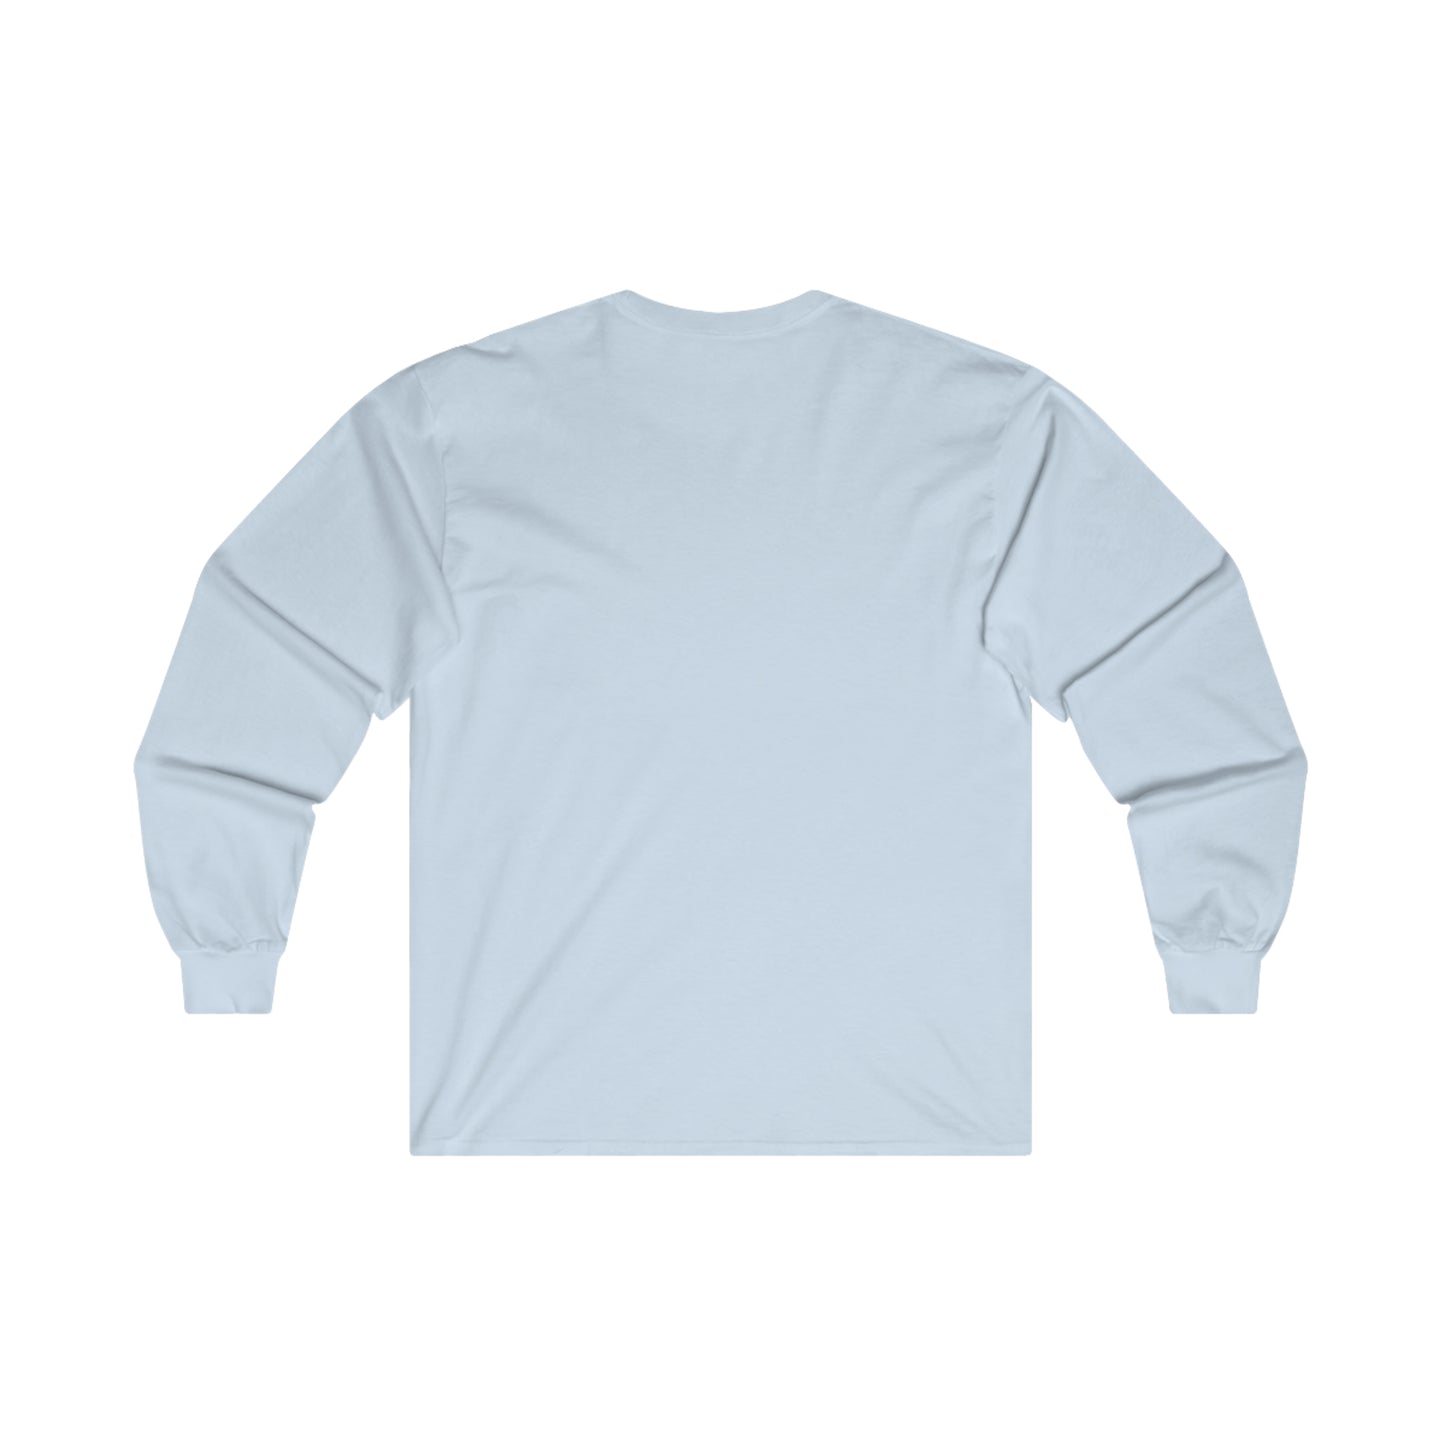 "It's Possible" Single Long Sleeve T-Shirt (Teal)